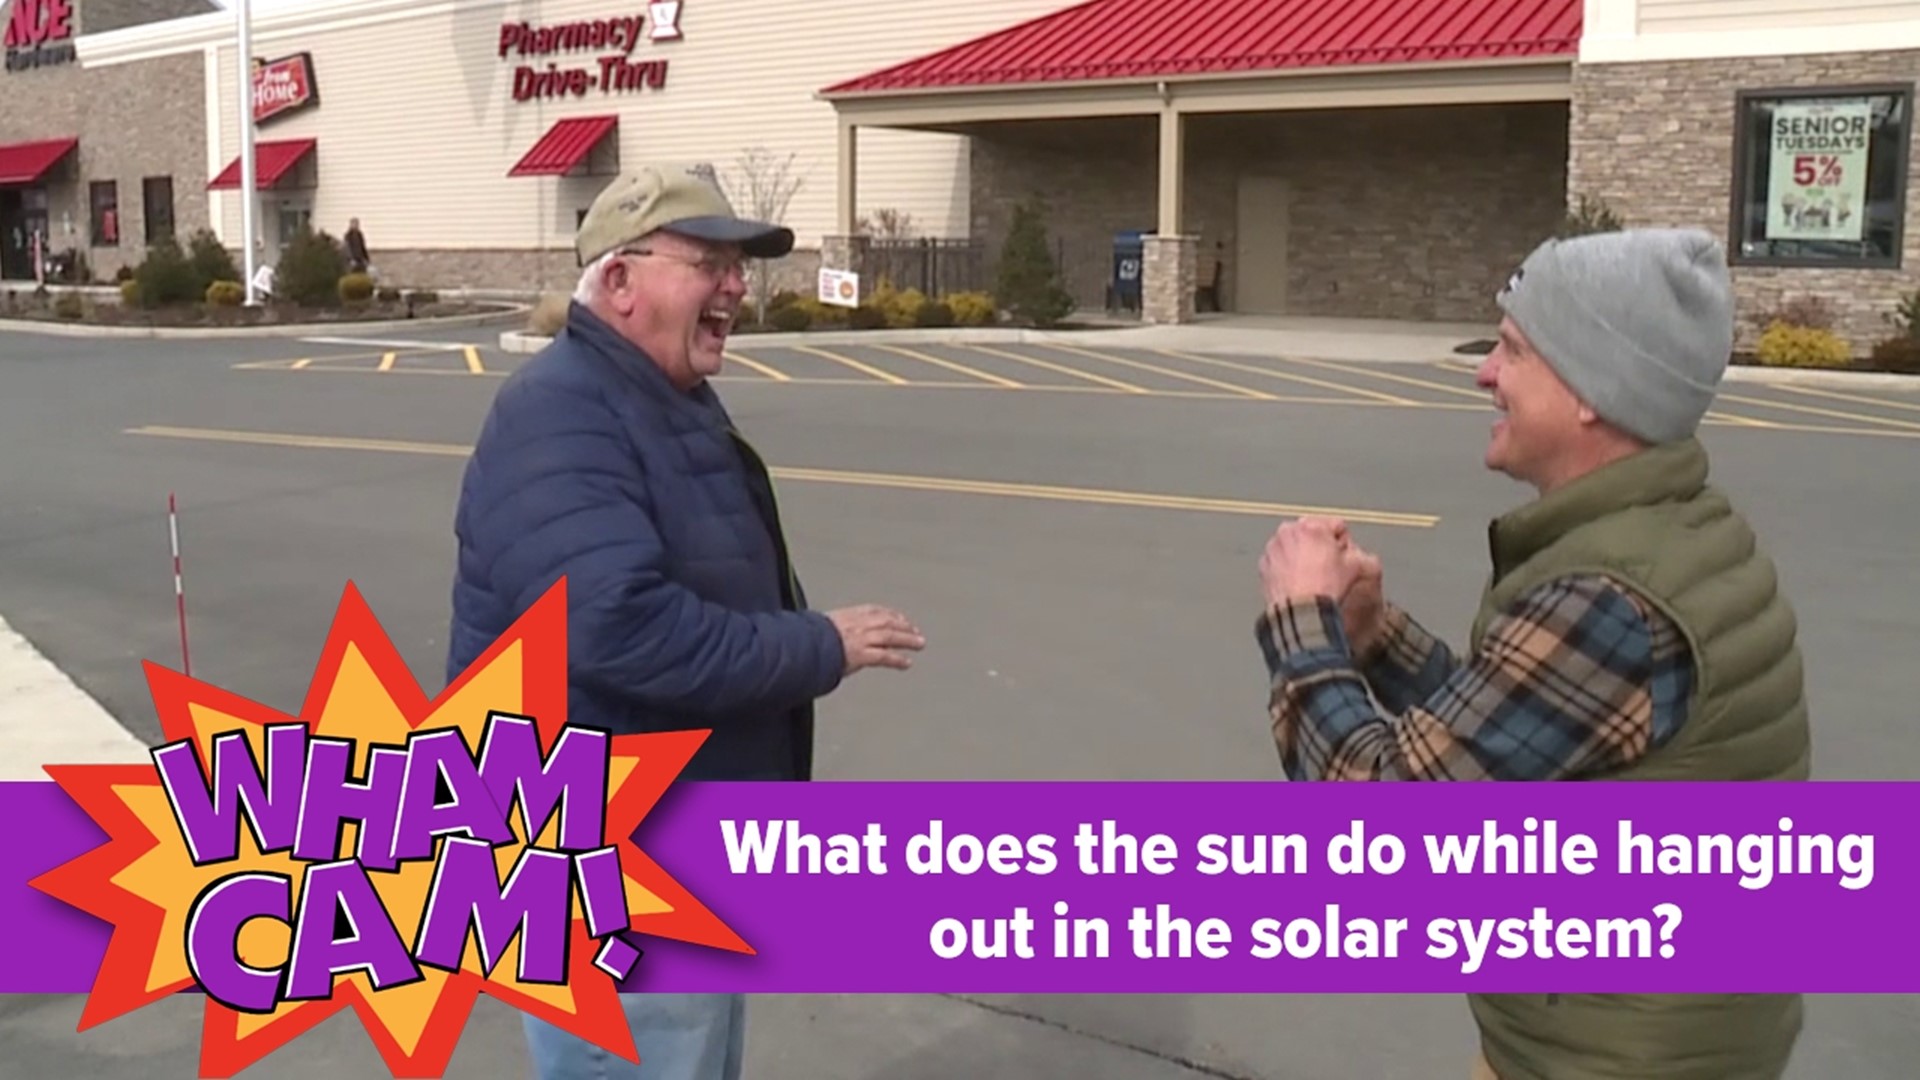 Joe finds out what the sun does while hanging out in the solar system?